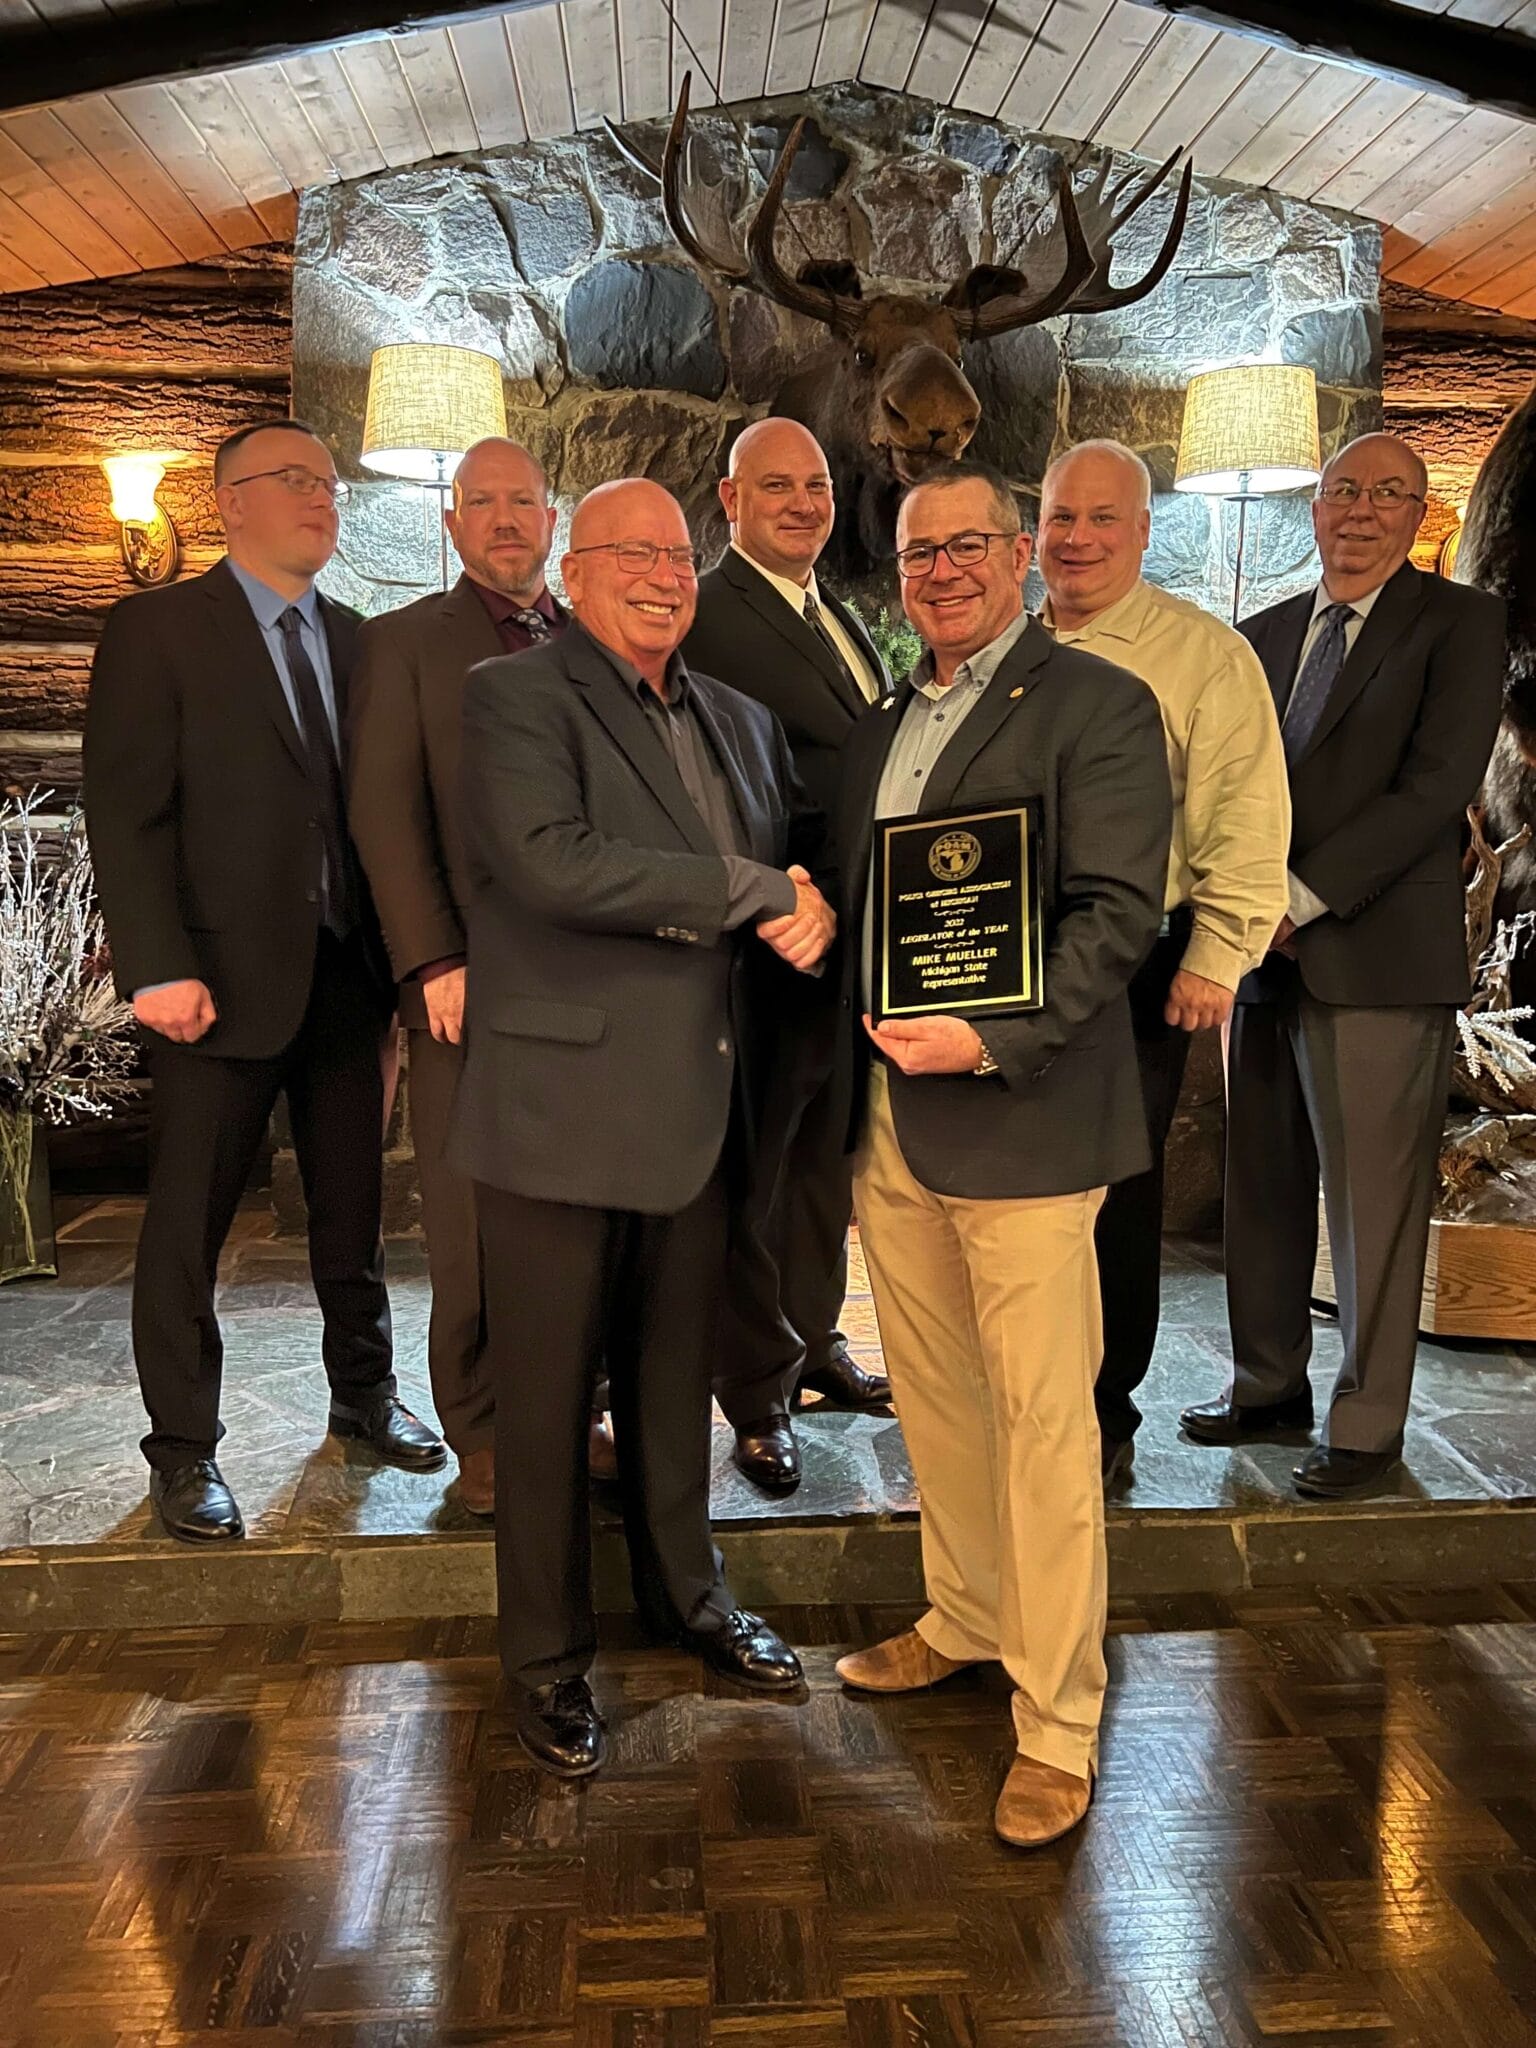 Michigan State Representative Mike Mueller presented with the 2022 Legislator of the Year Award from POAM